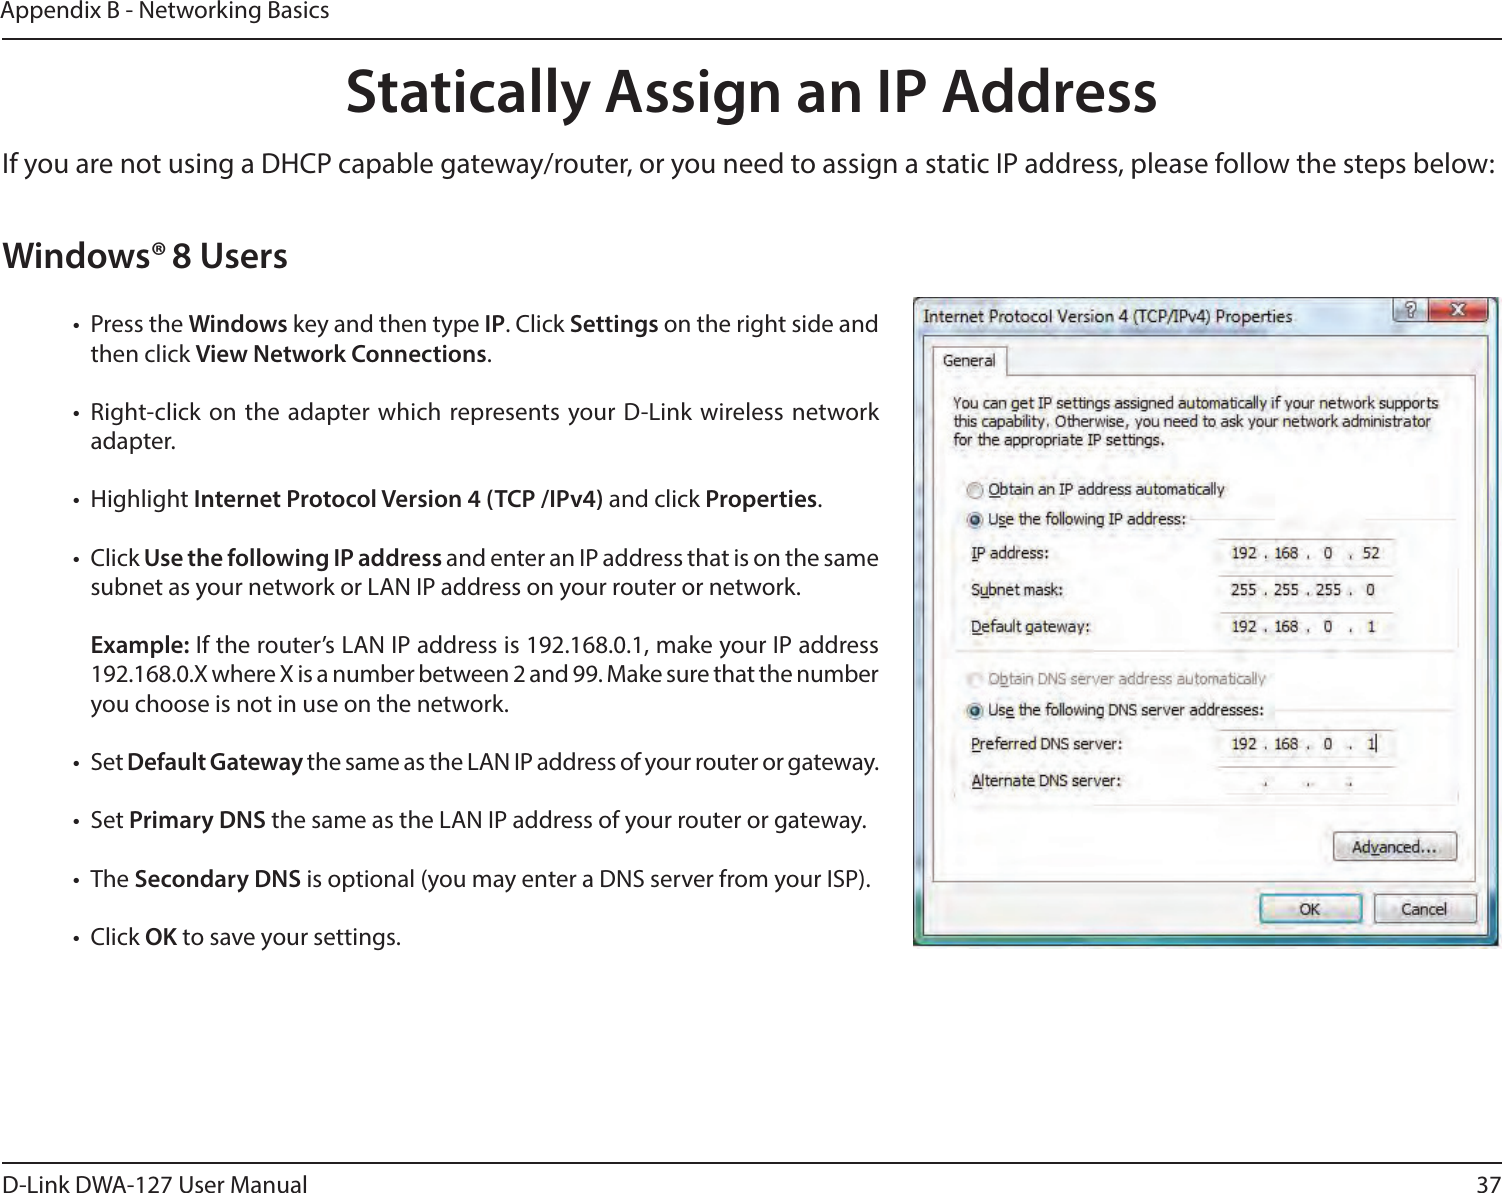 37D-Link DWA-127 User ManualAppendix B - Networking BasicsStatically Assign an IP AddressIf you are not using a DHCP capable gateway/router, or you need to assign a static IP address, please follow the steps below:Windows® 8 Users•  Press the Windows key and then type IP. Click Settings on the right side and then click View Network Connections. • Right-click on the adapter which represents your D-Link wireless network adapter.• Highlight Internet Protocol Version 4 (TCP /IPv4) and click Properties.• Click Use the following IP address and enter an IP address that is on the same subnet as your network or LAN IP address on your router or network. Example: If the router’s LAN IP address is 192.168.0.1, make your IP address 192.168.0.X where X is a number between 2 and 99. Make sure that the number you choose is not in use on the network. • Set Default Gateway the same as the LAN IP address of your router or gateway.• Set Primary DNS the same as the LAN IP address of your router or gateway. • The Secondary DNS is optional (you may enter a DNS server from your ISP).• Click OK to save your settings.